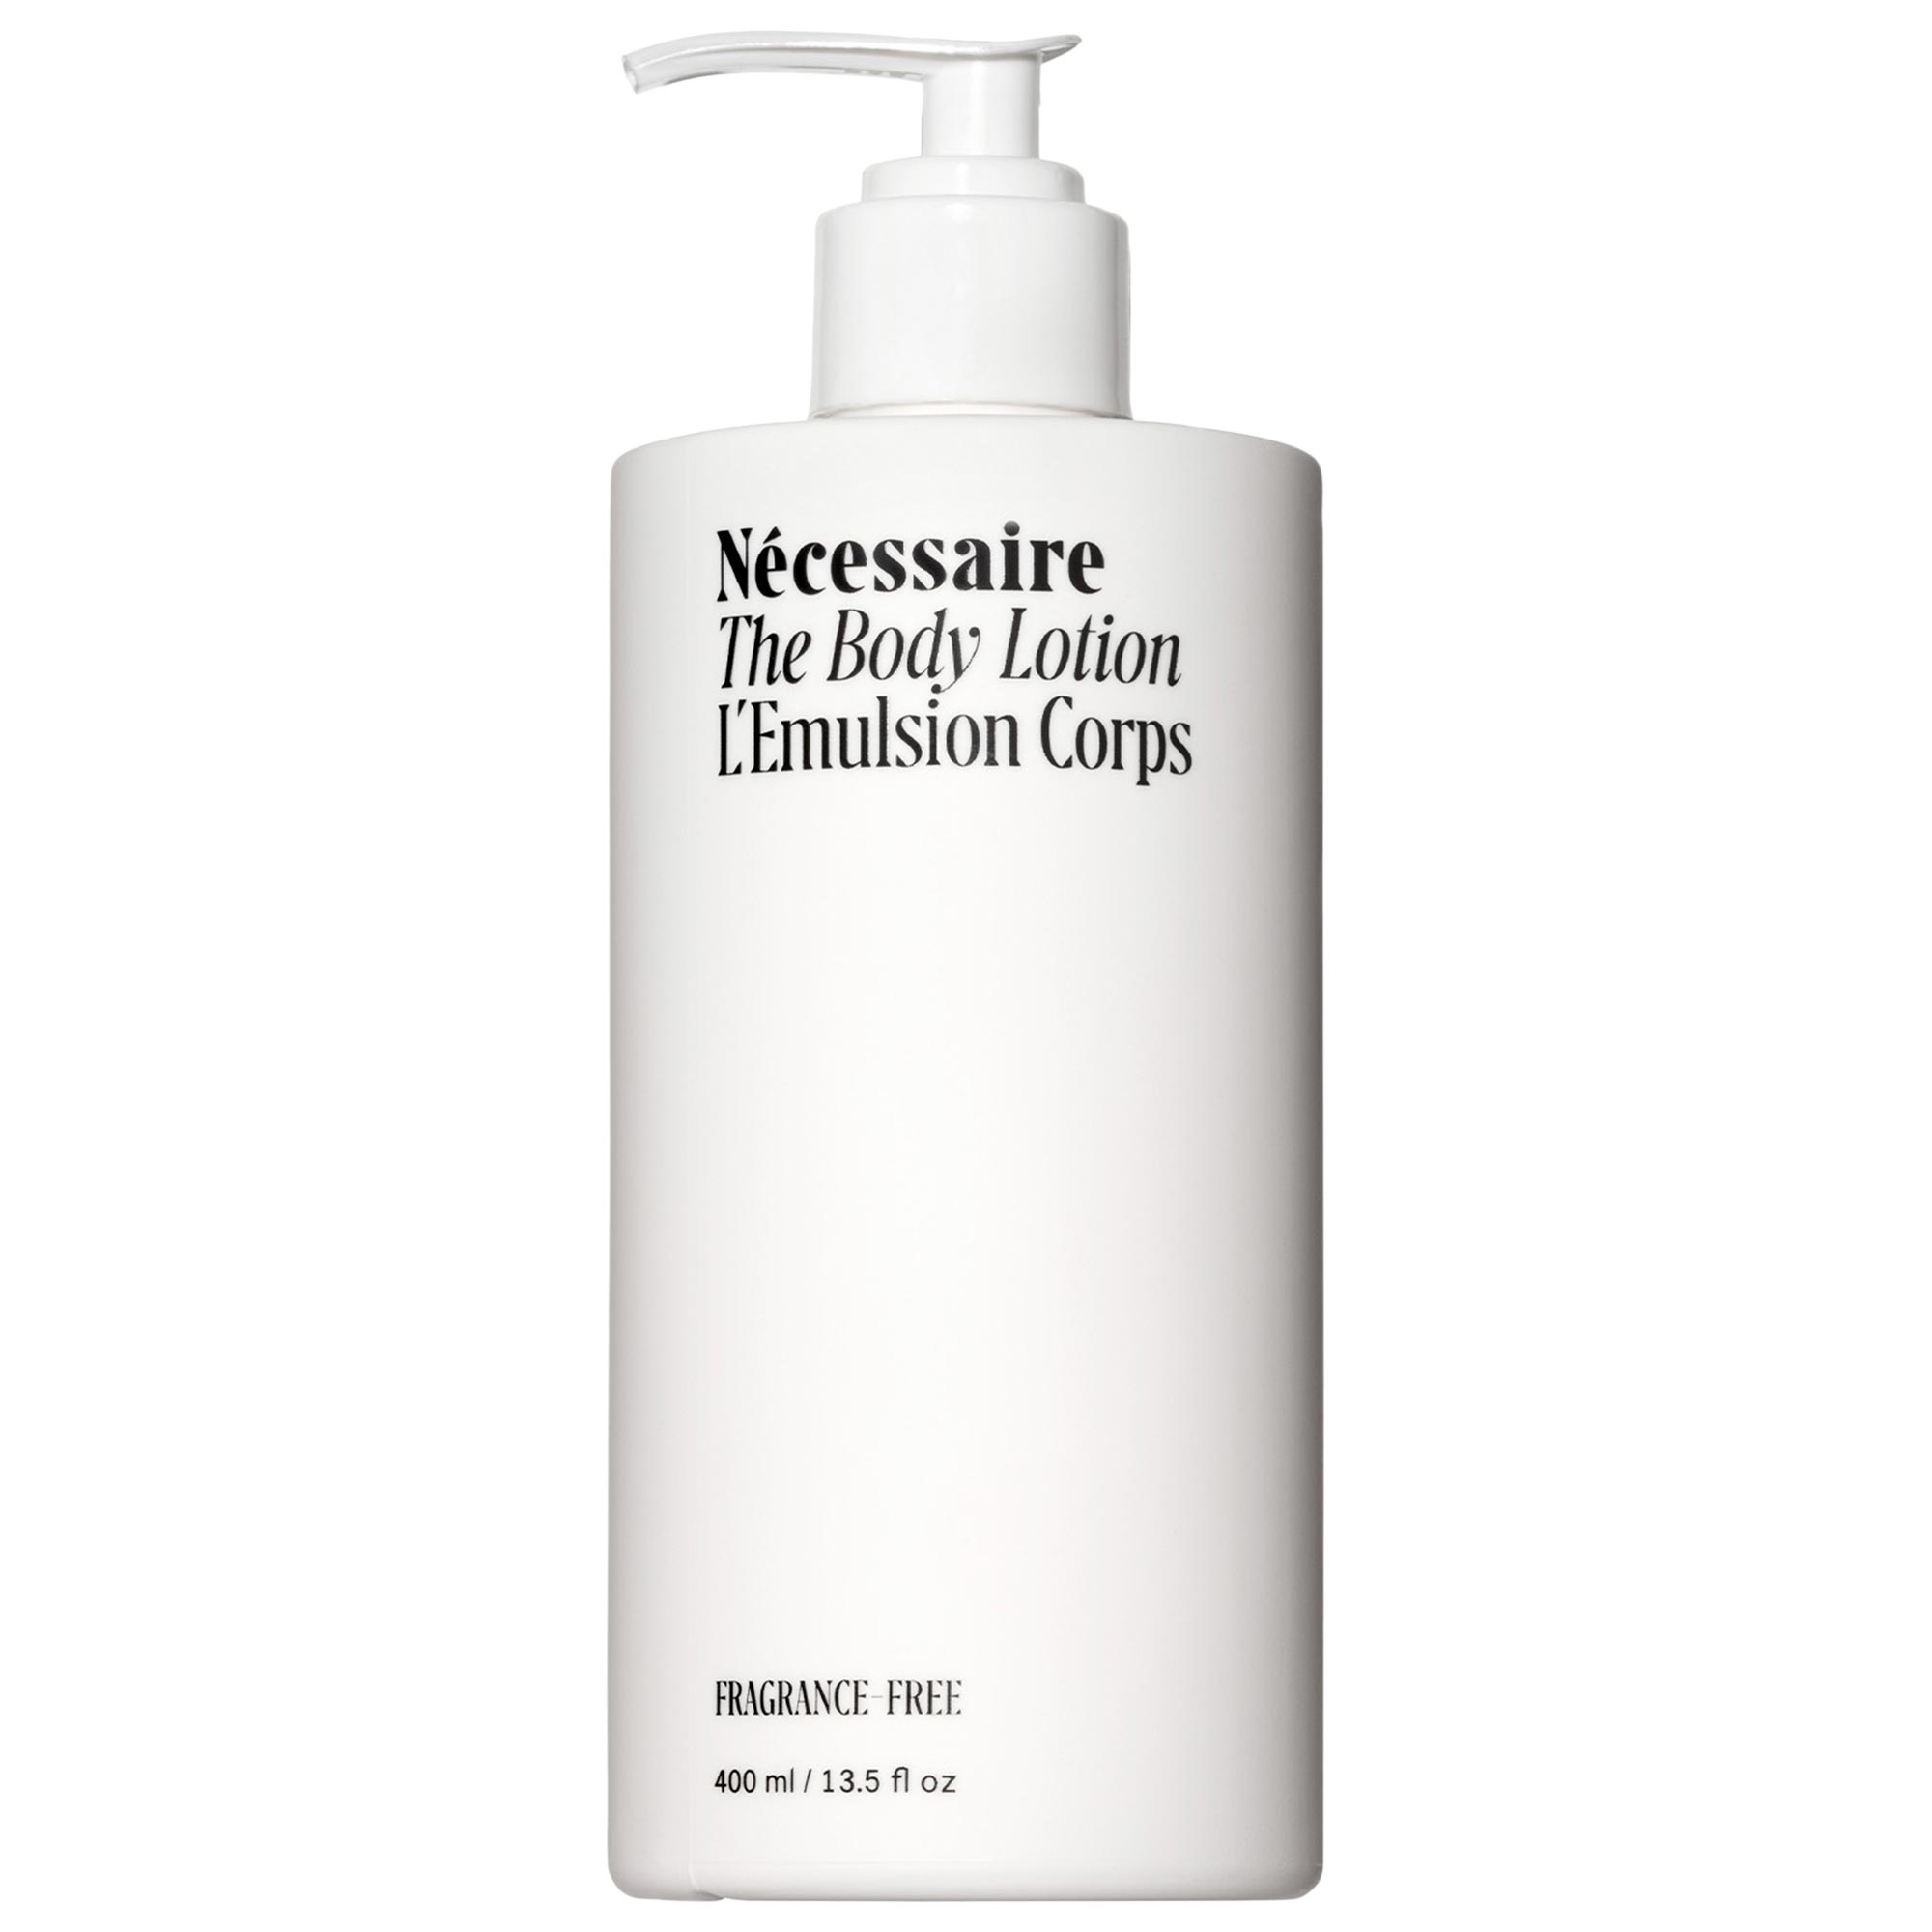 The Body Lotion - Firming Moisturizer With 5 Peptides and 2.5% Niacinamide with Pump Nécessaire